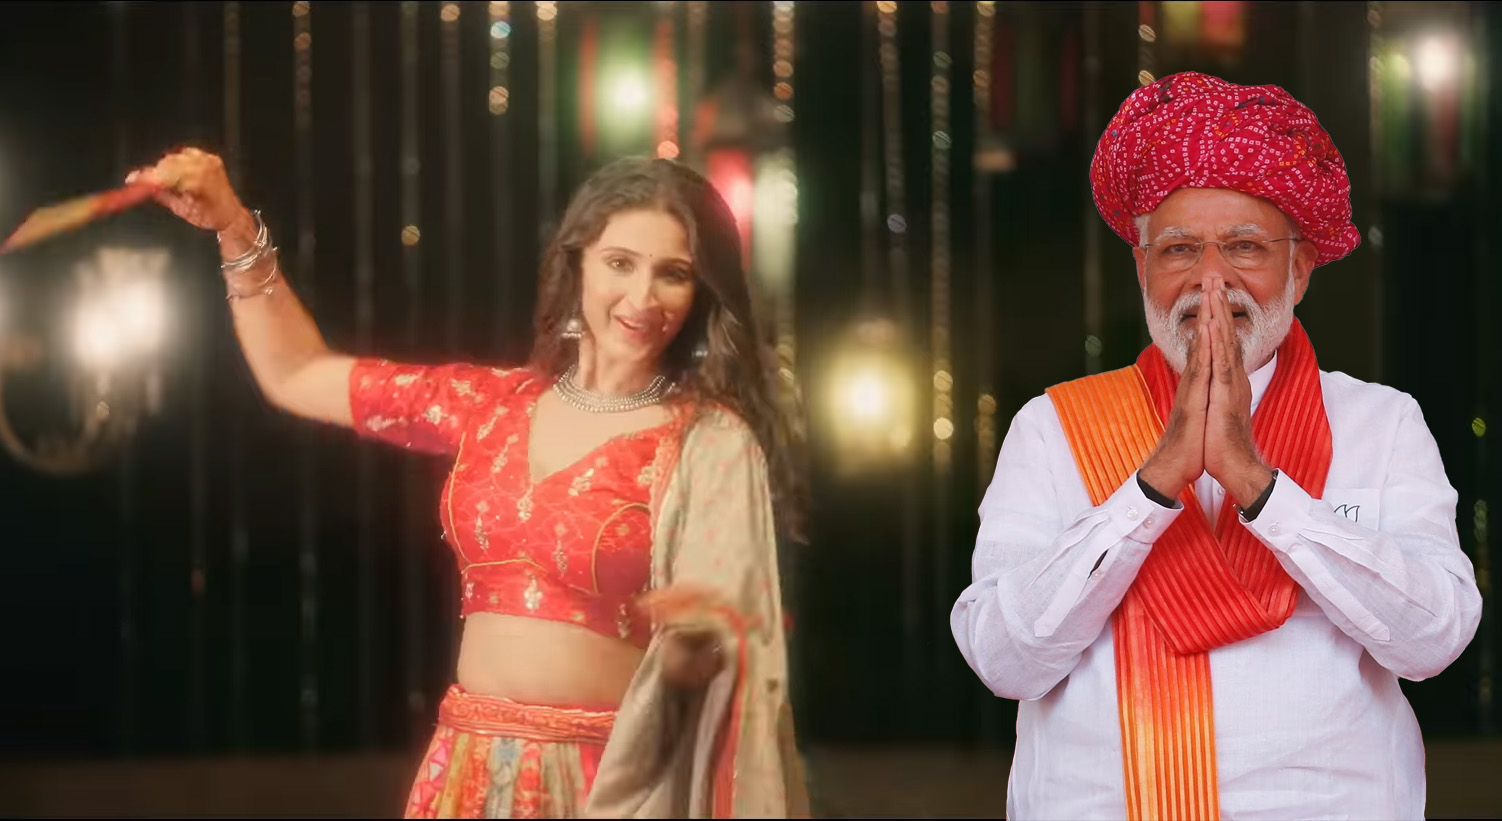 Music video based on Garba song penned by PM Narendra Modi released